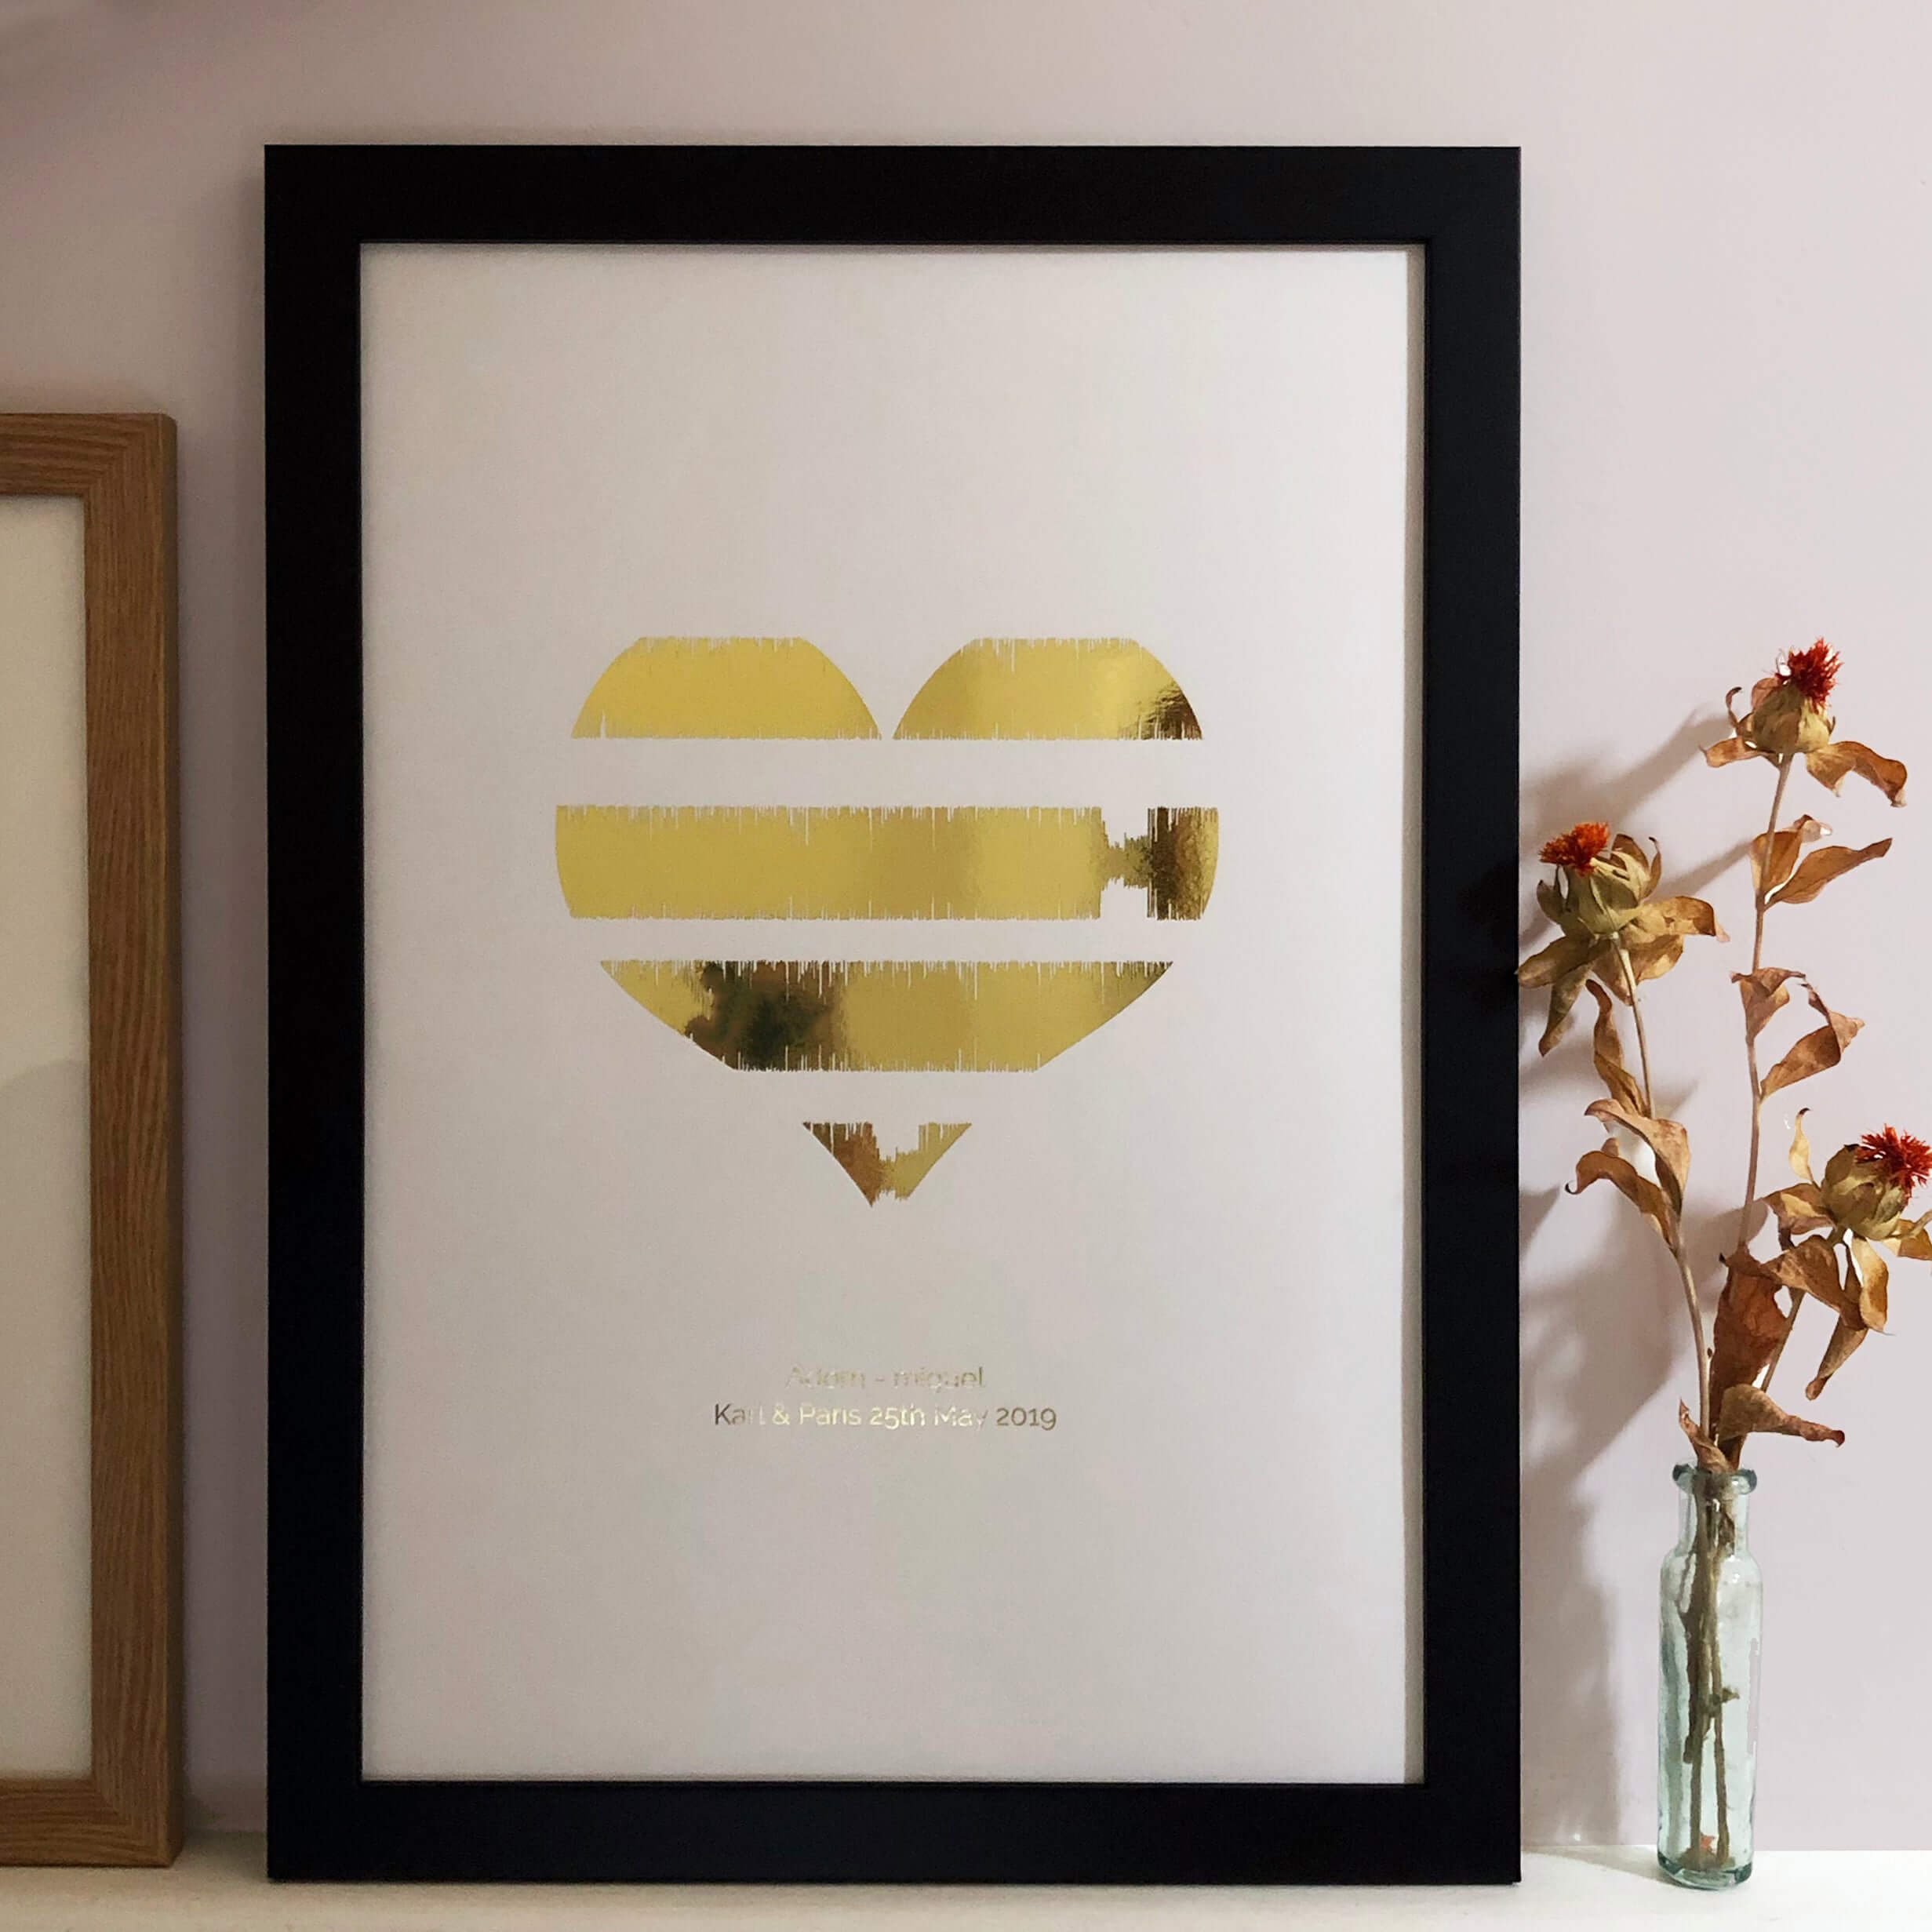 Personalised Metallic Heart Soundwave Print with Framing Options